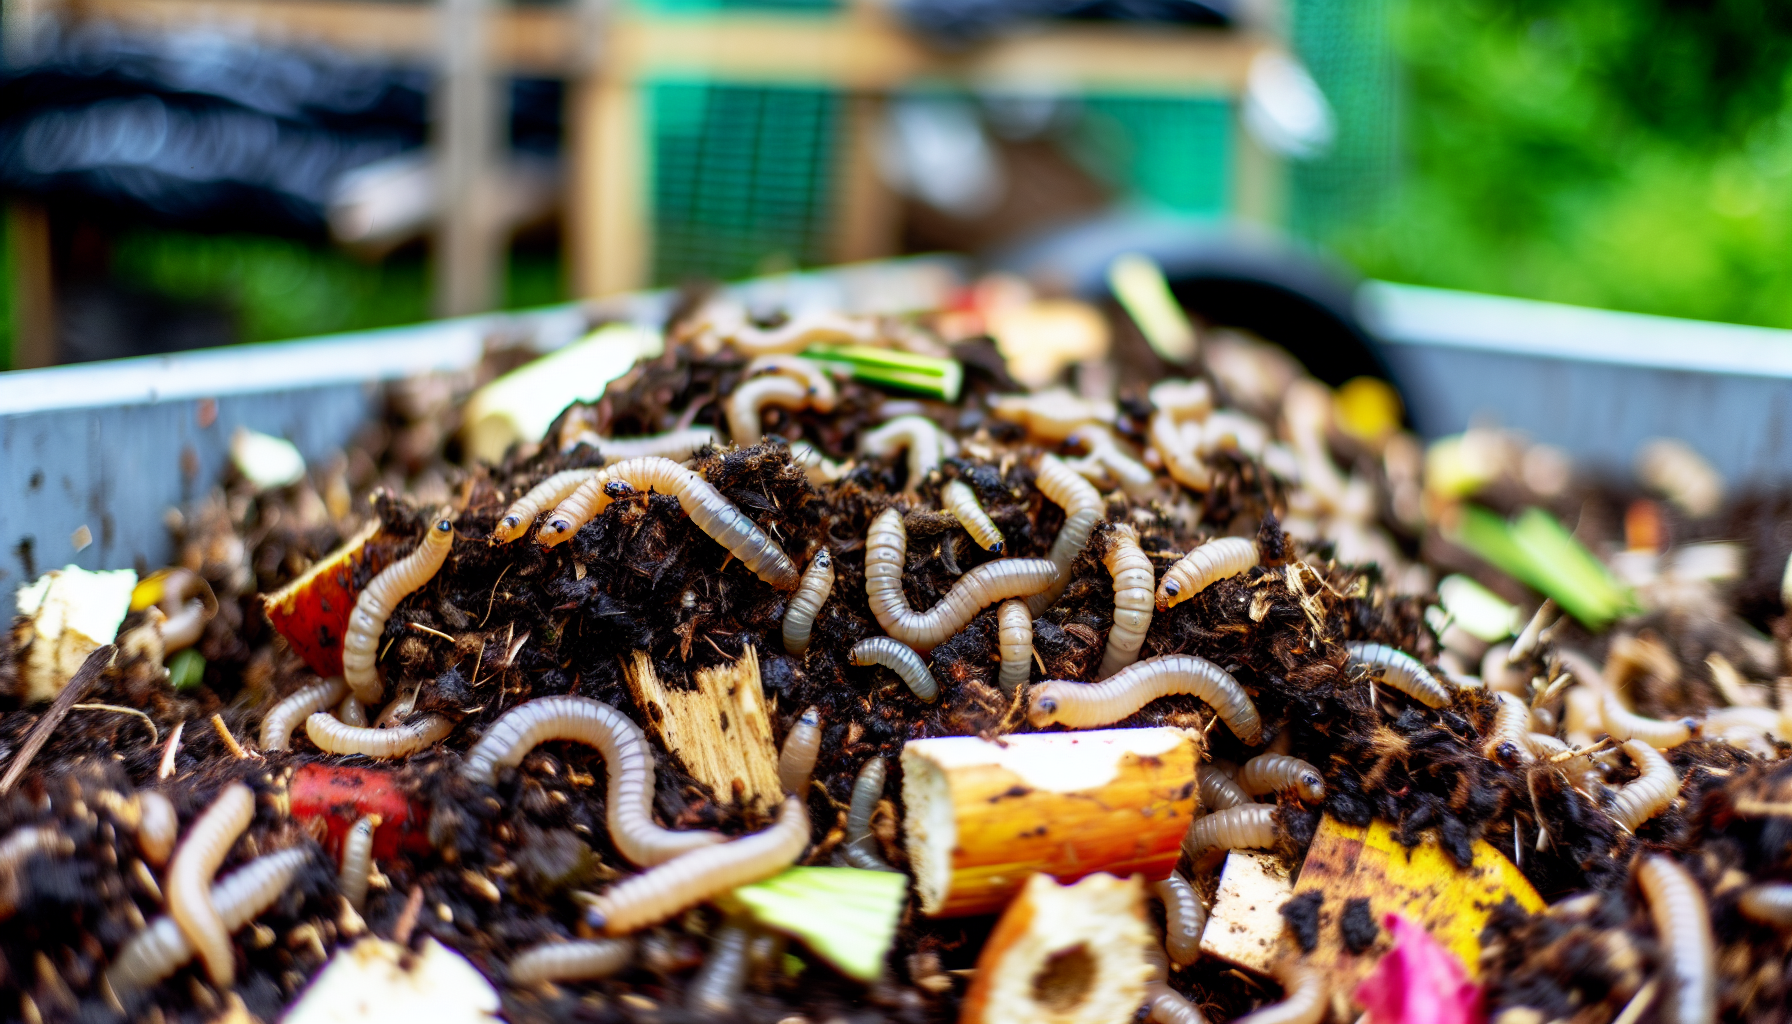 Compost pile with maggots